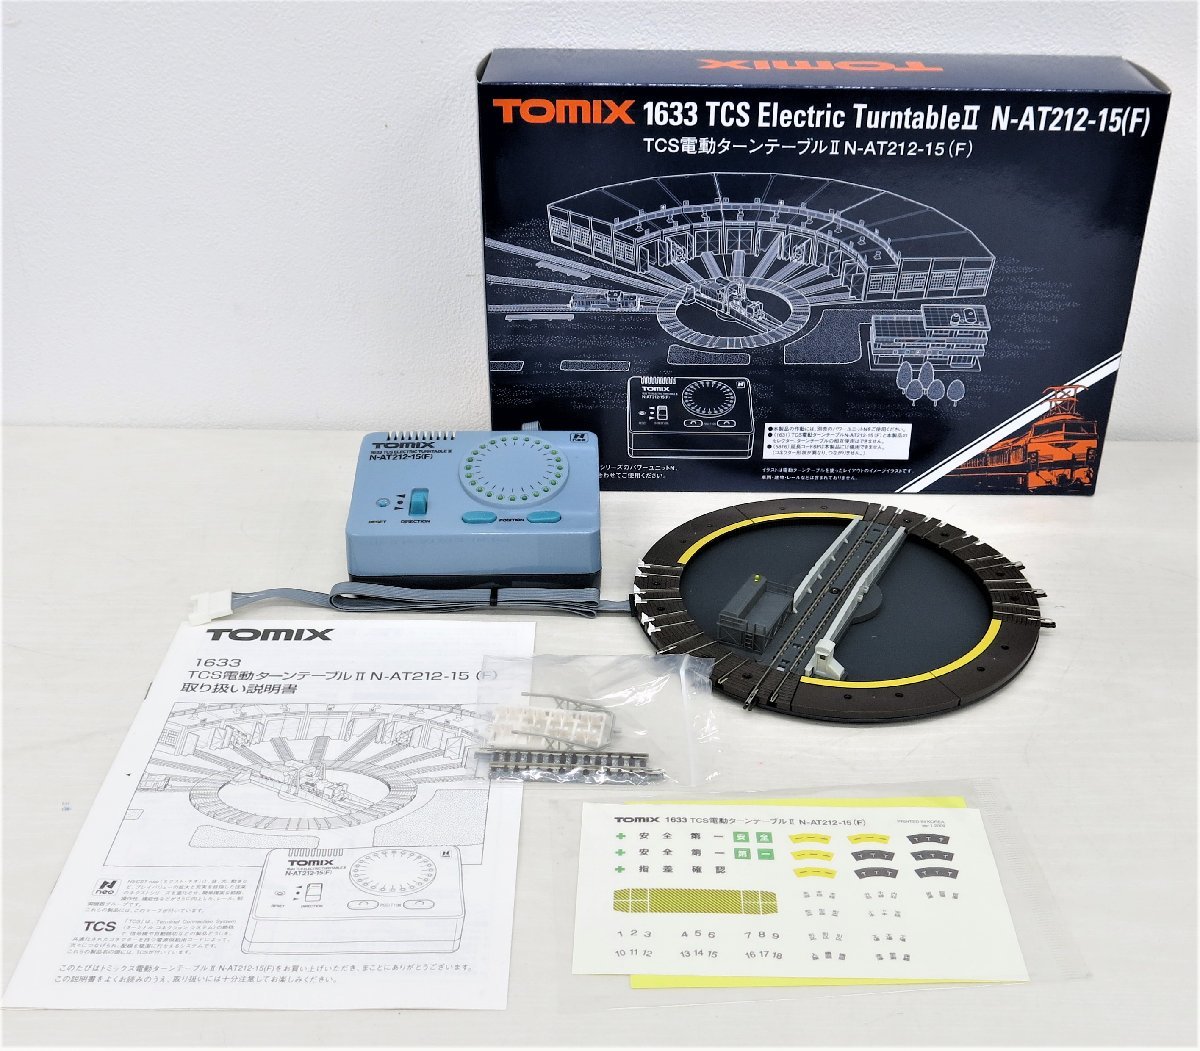 Tomix 1633 TCS Electric Turntable II N-AT212-15 F N scale 